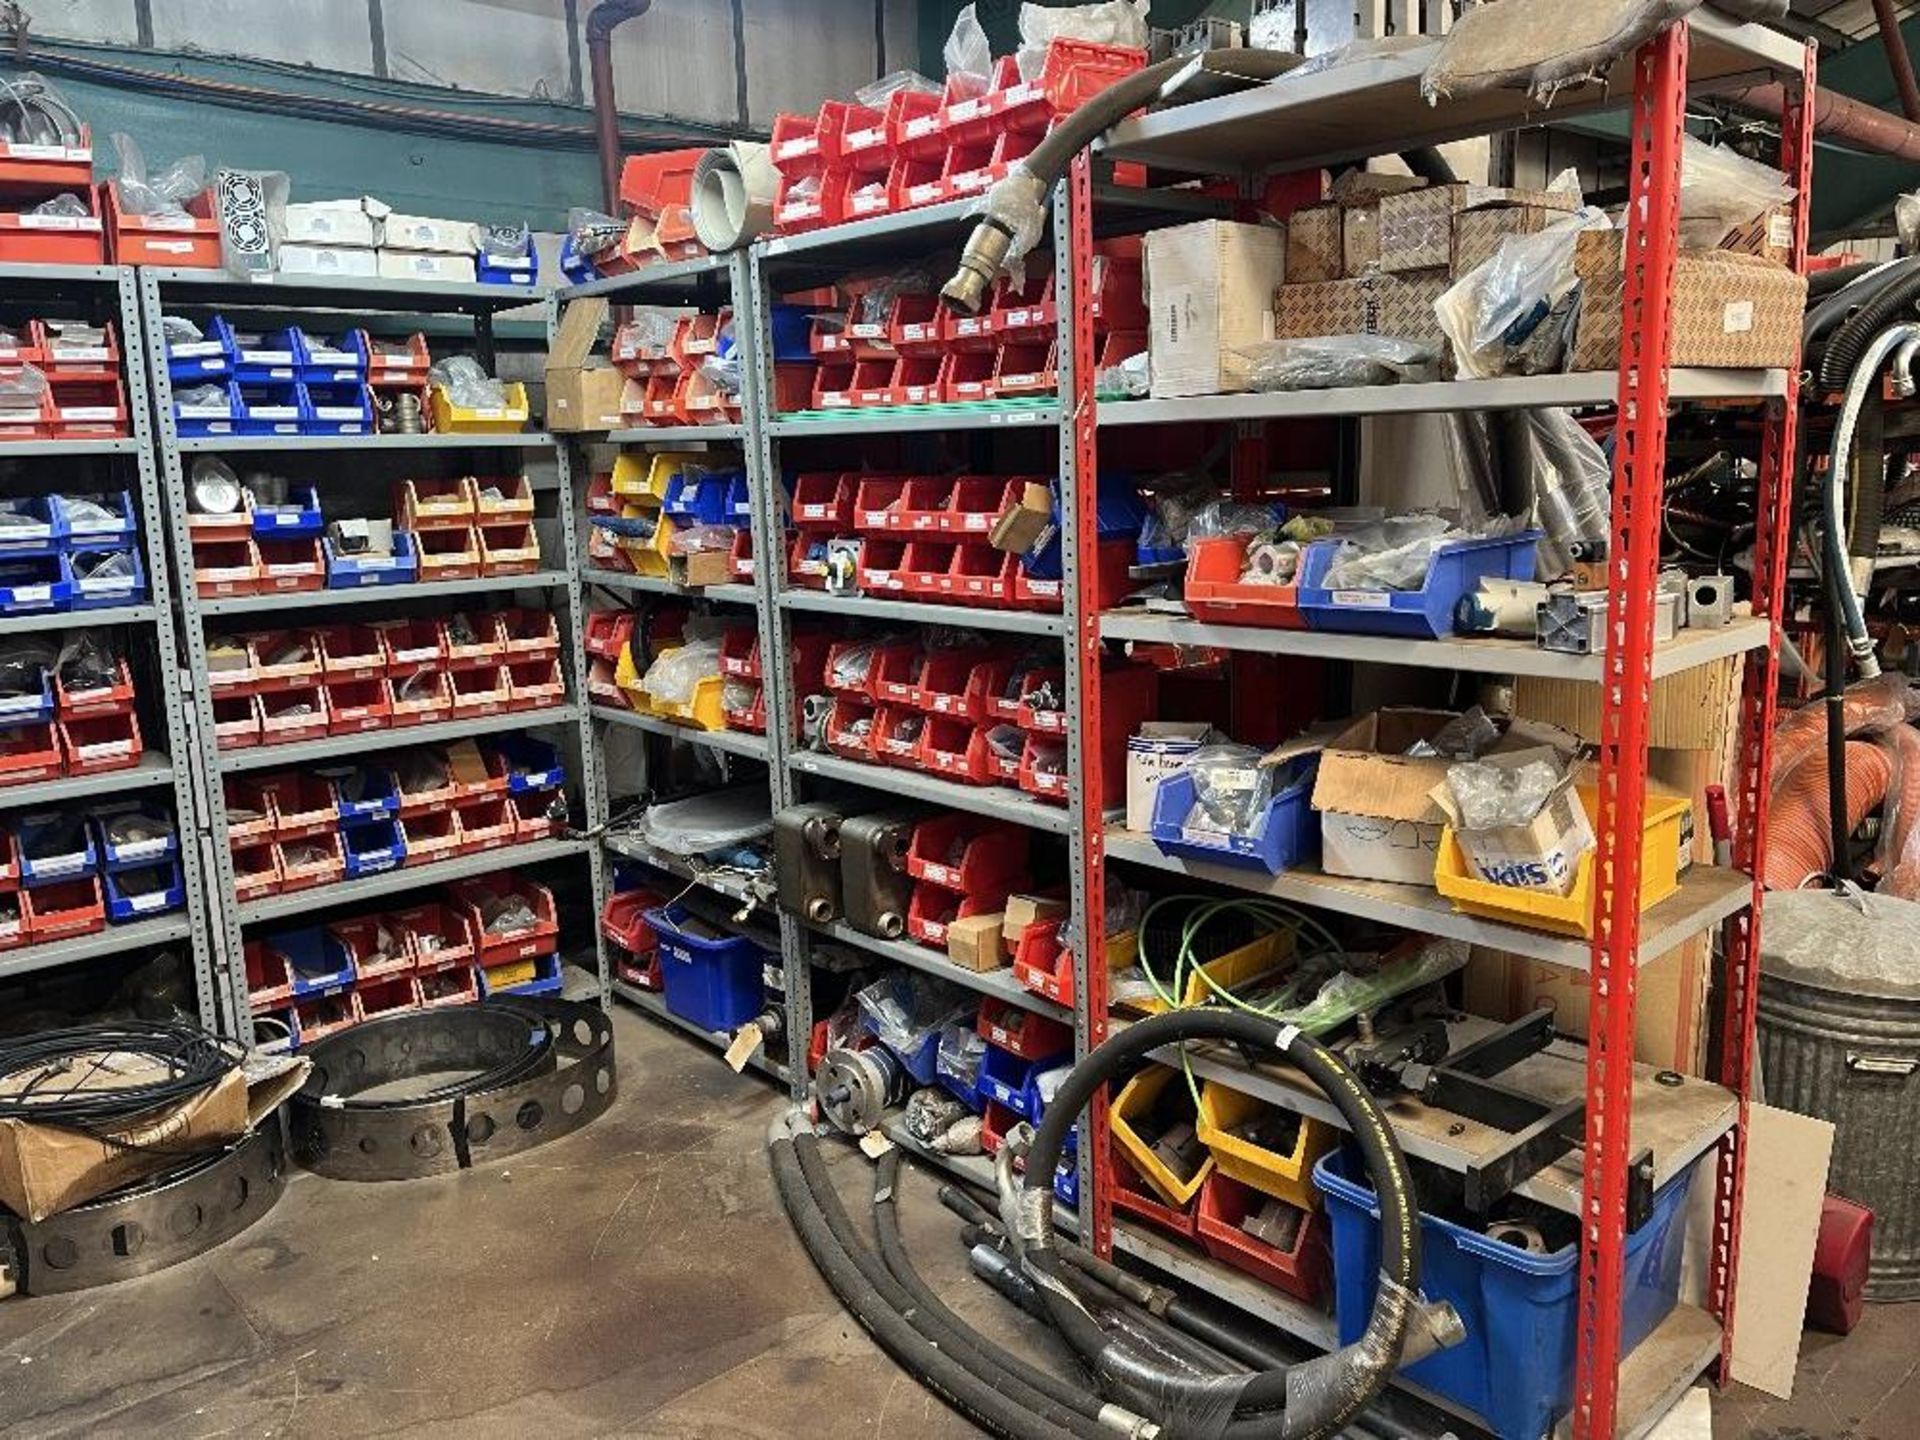 Contents of mezzanine floor containing large range of machine spare parts and consumables - Image 19 of 47